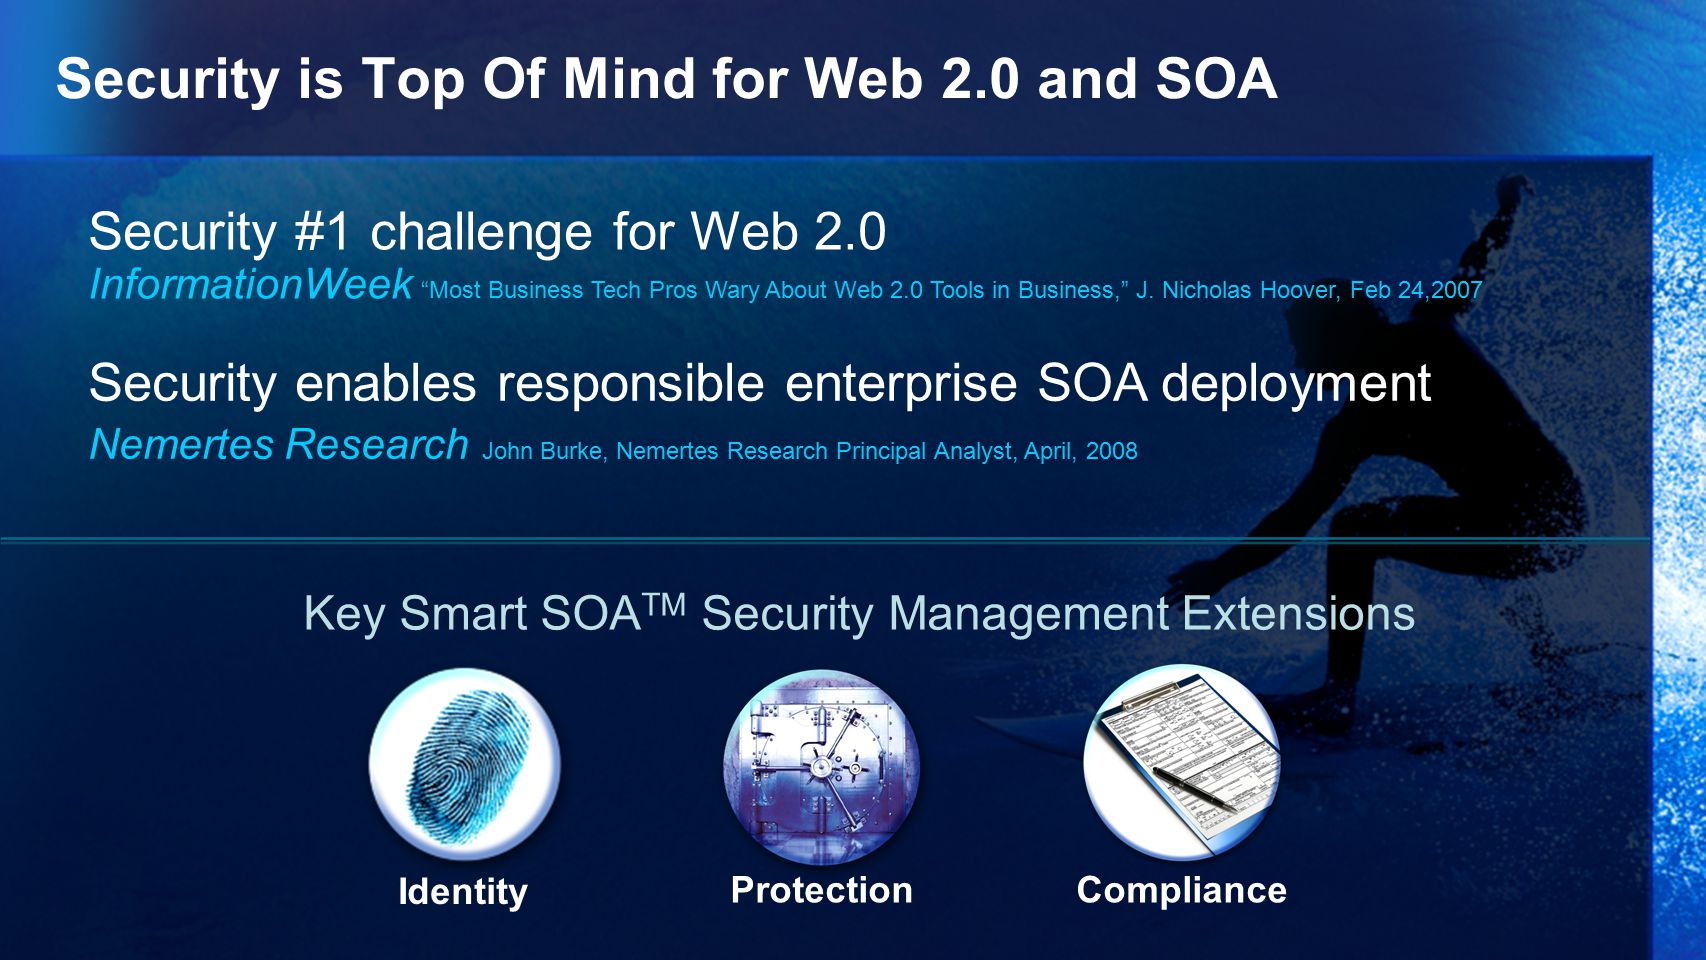 Key Smart SOA TM Security Management Extensions Security #1 challenge for Web 2.0 InformationWeek Most Business Tech Pros Wary About Web 2.0 Tools in Business, J.